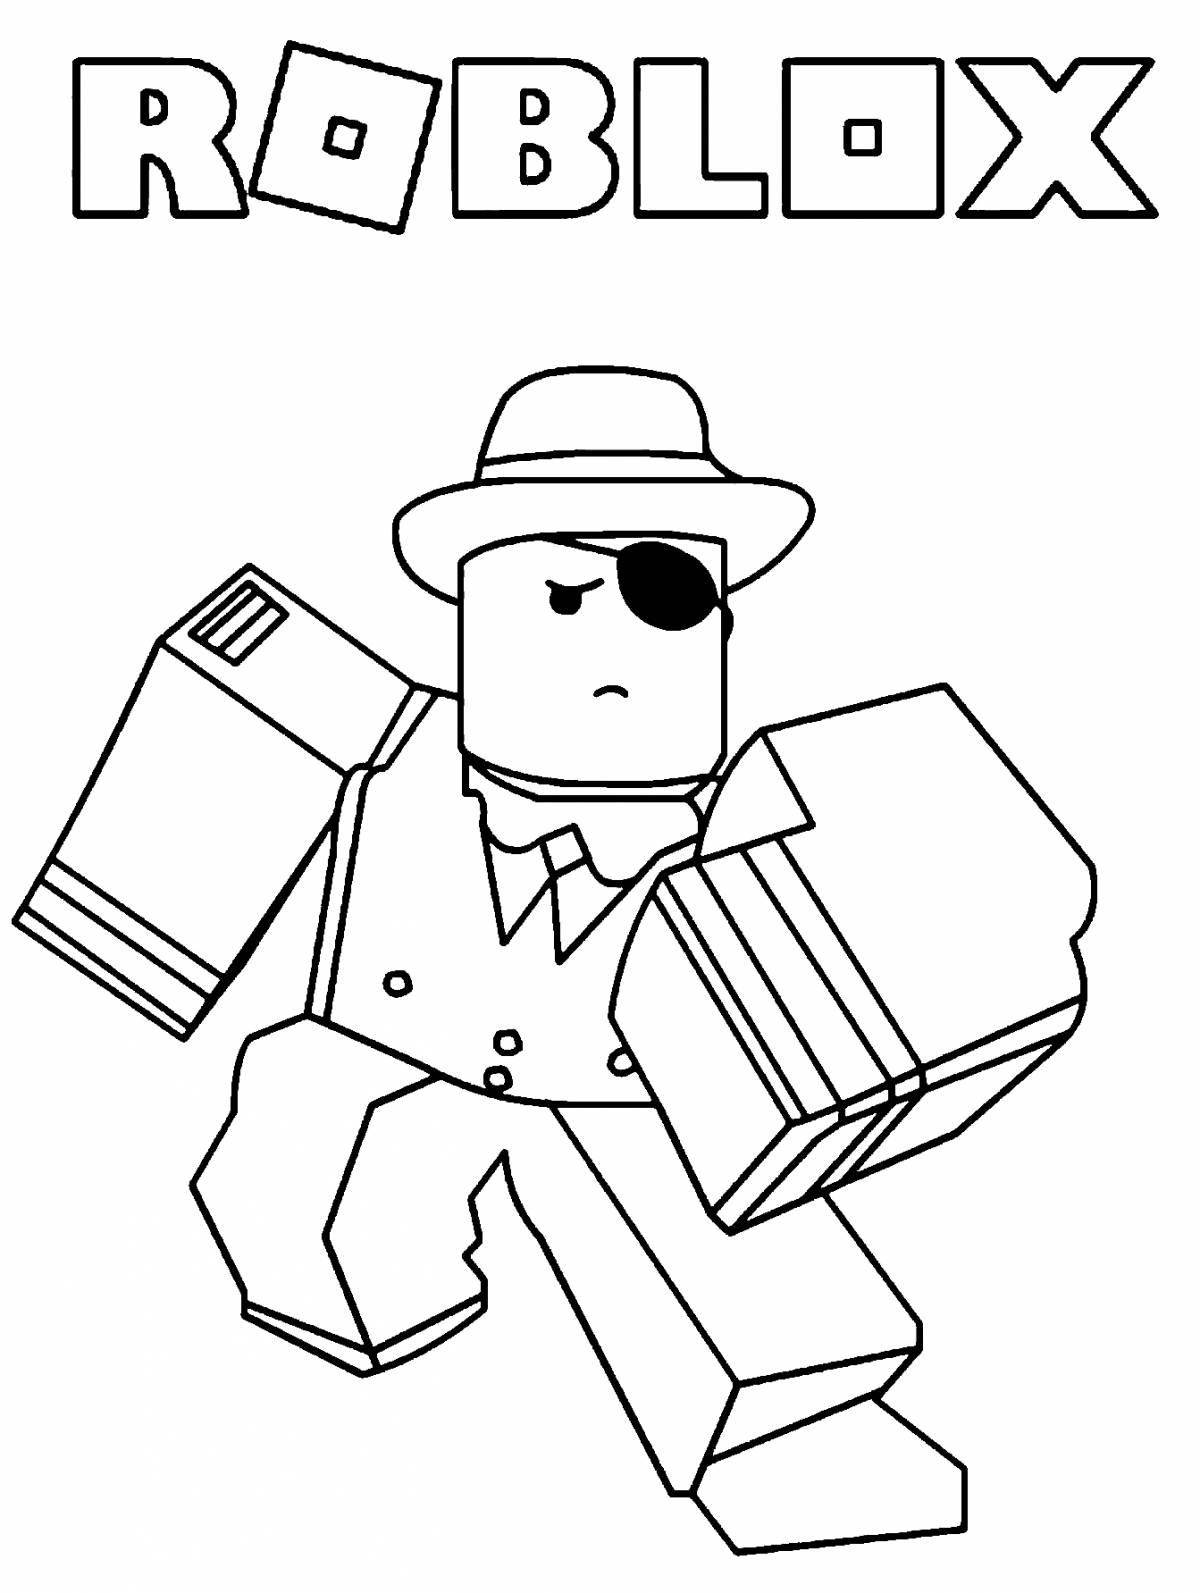 Adorable roblox skins coloring page for girls